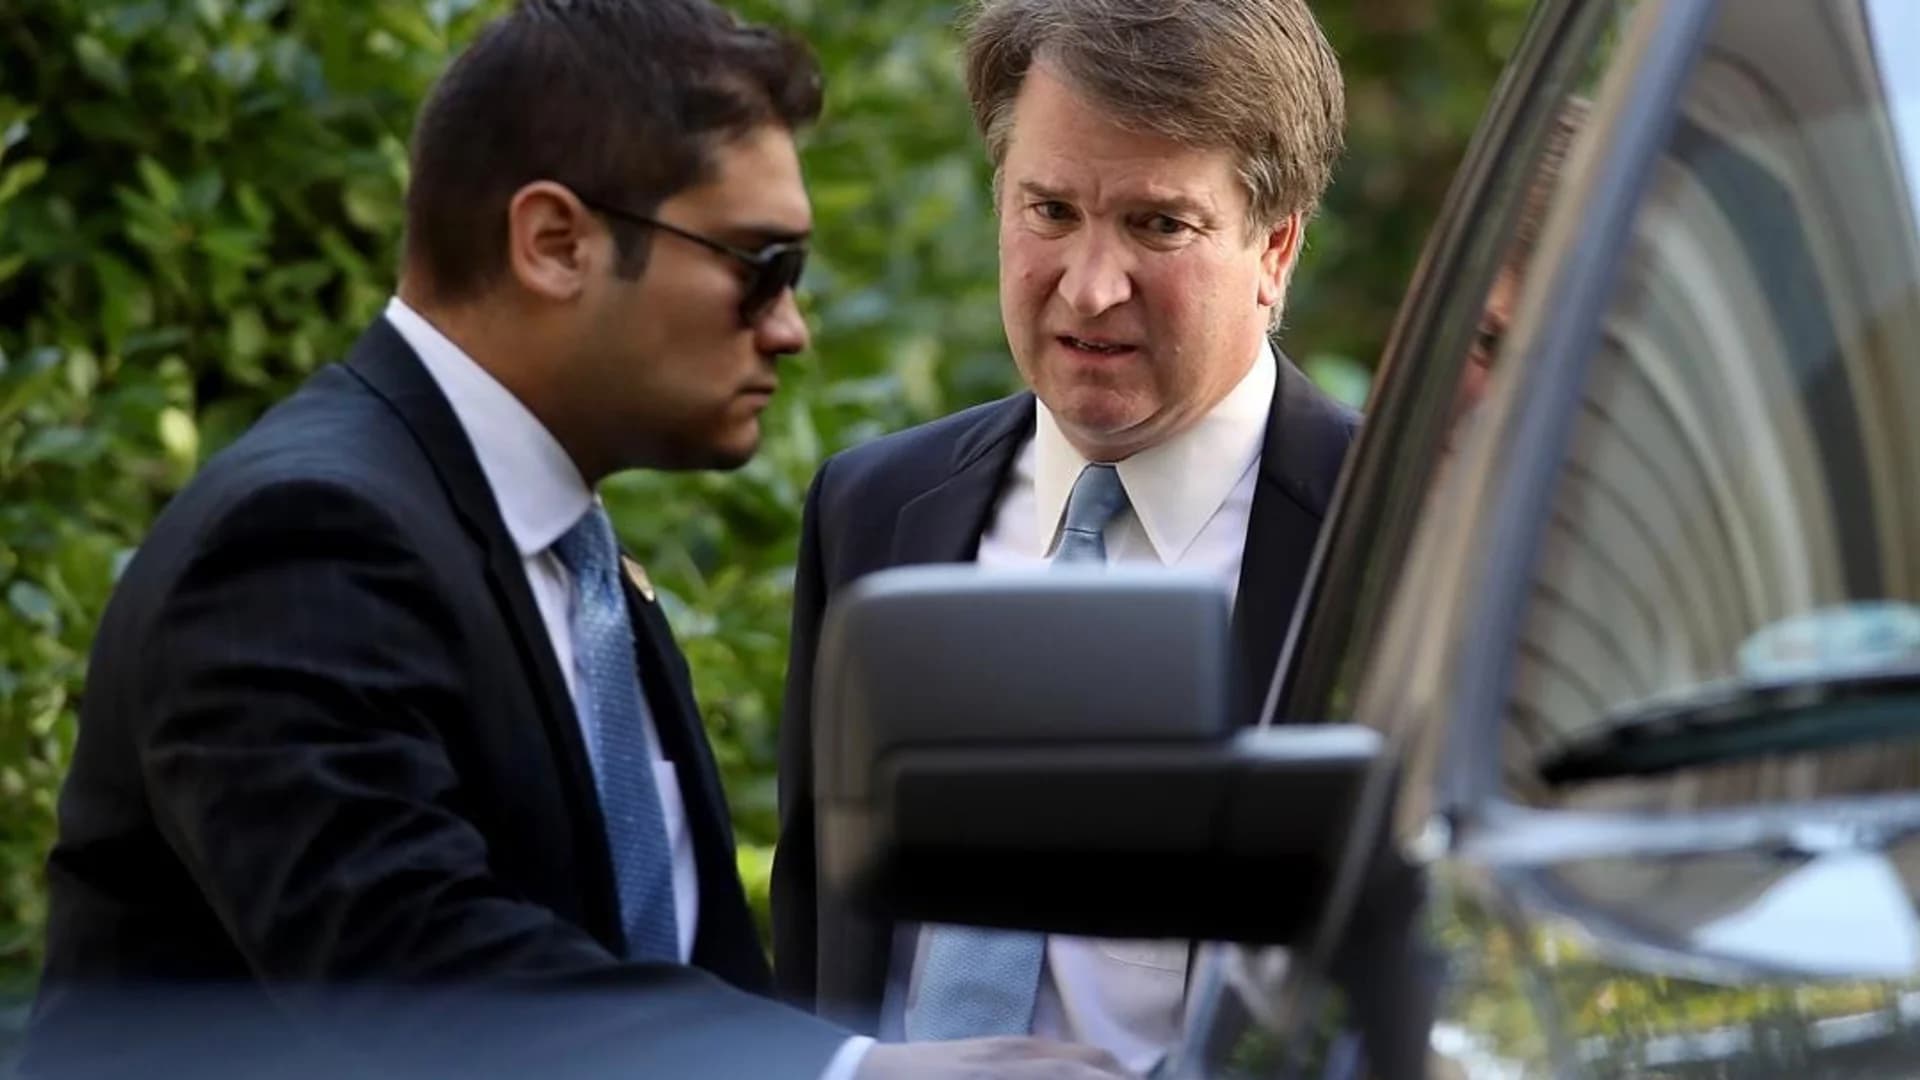 AP source: Kavanaugh, Ford agree to testify on Thursday